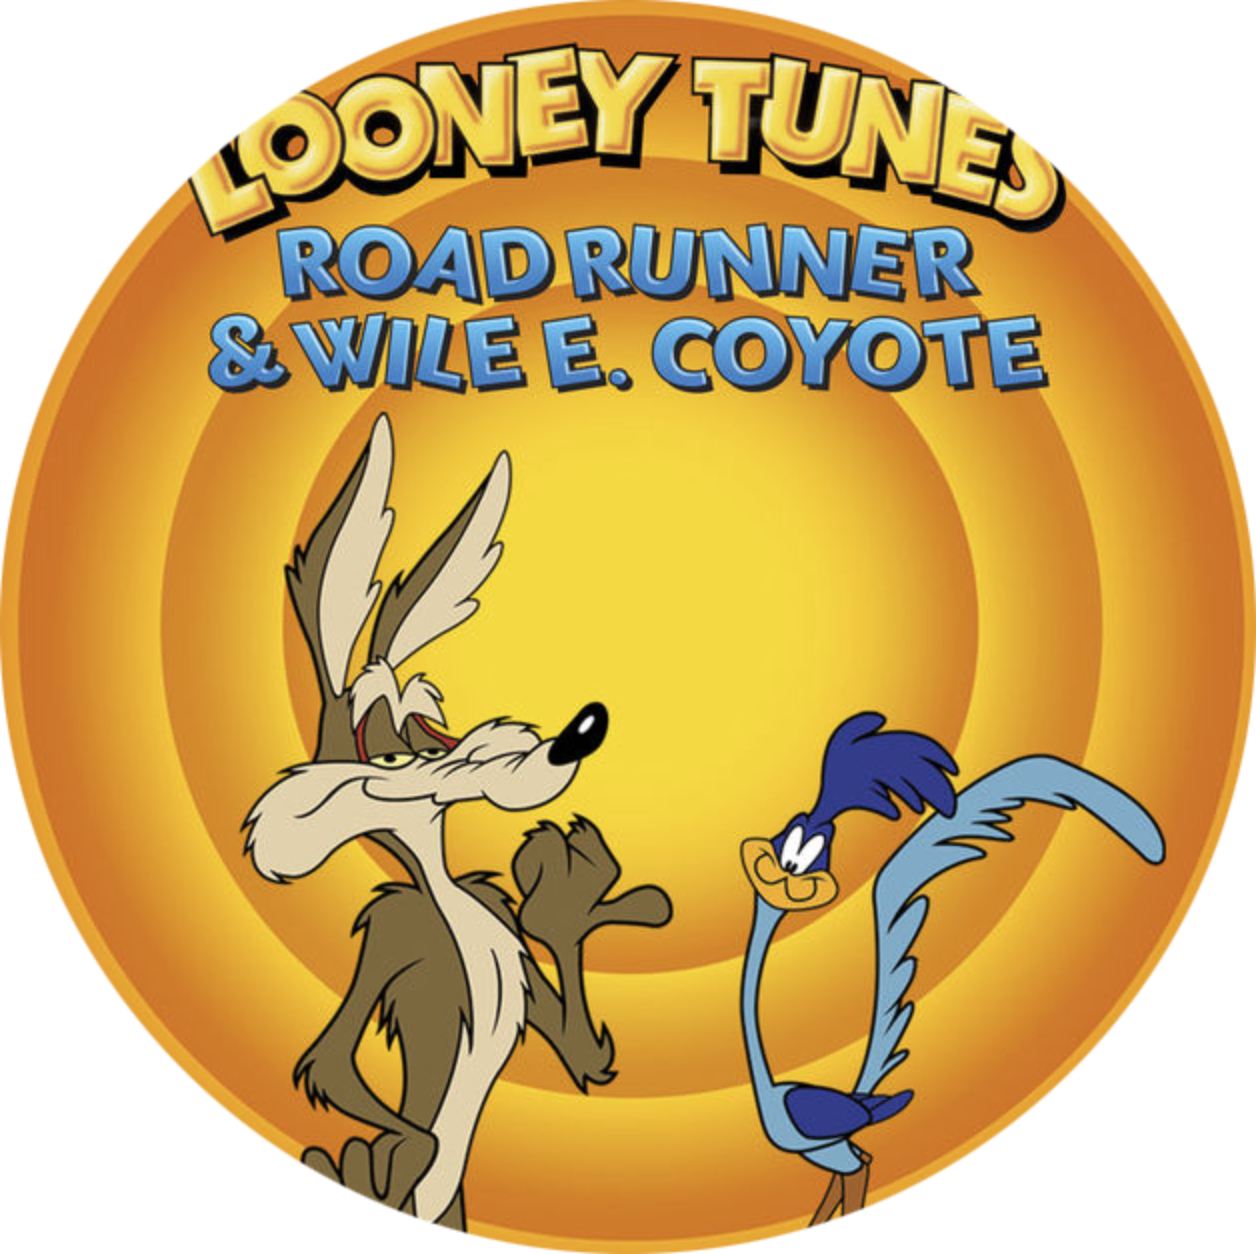 Wile E. Coyote and The Road Runner Complete (2 DVDs Box Set)